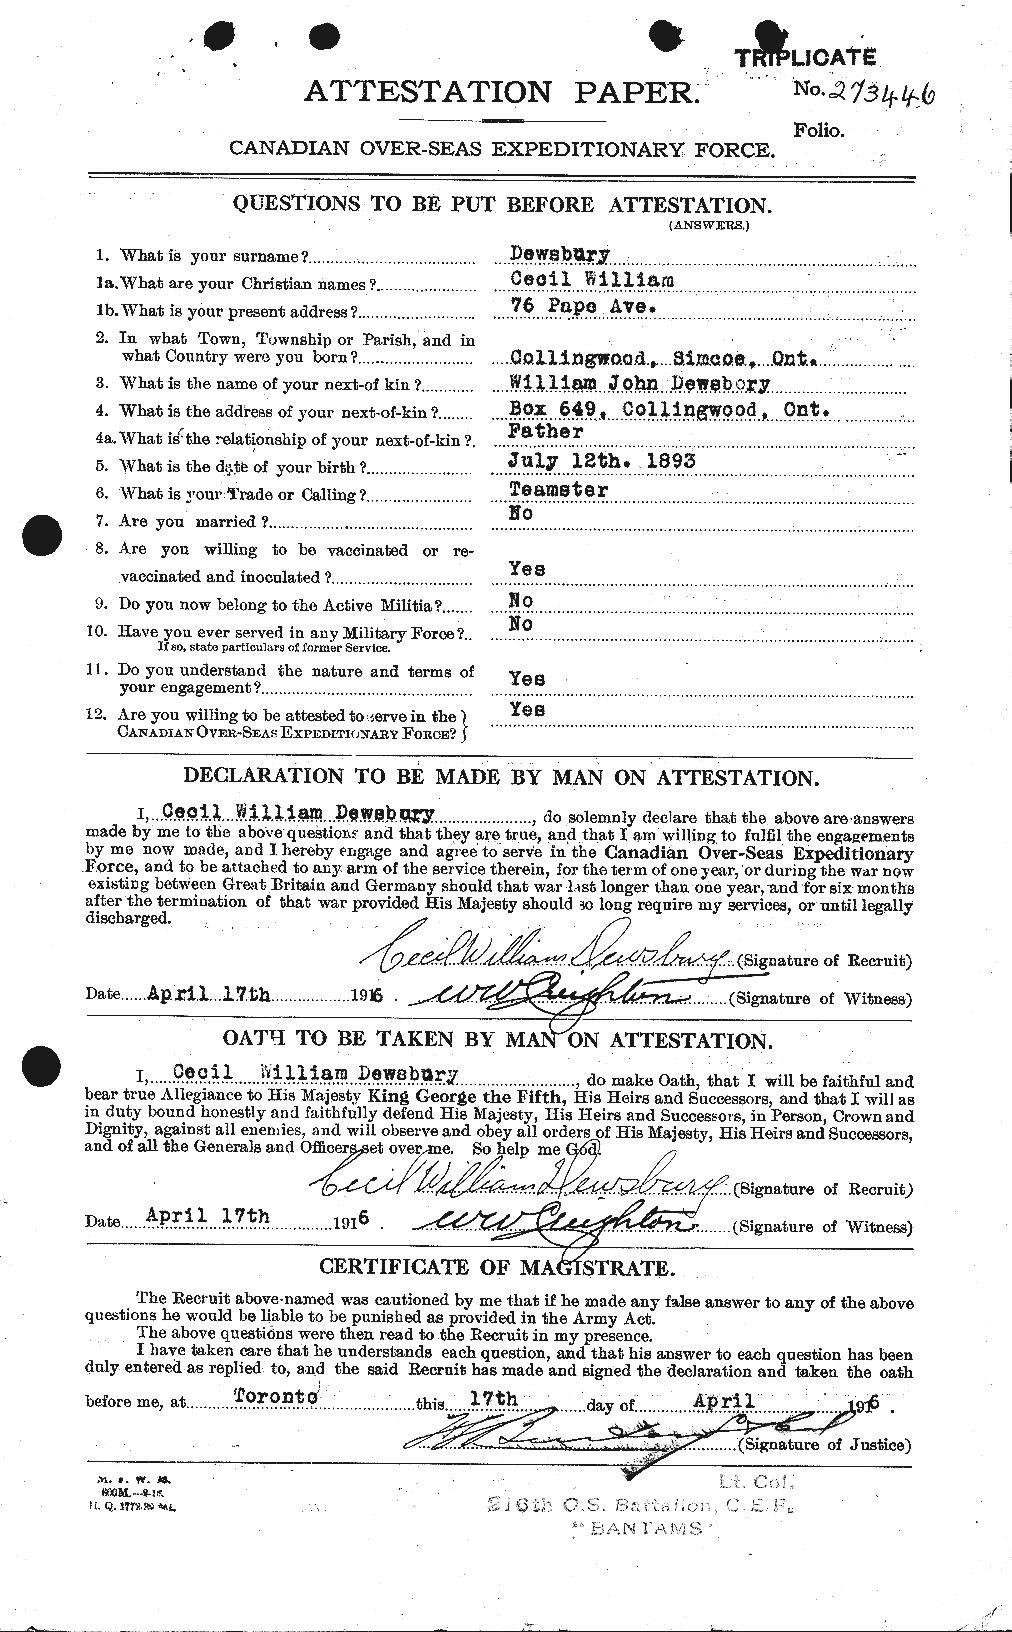 Personnel Records of the First World War - CEF 293126a